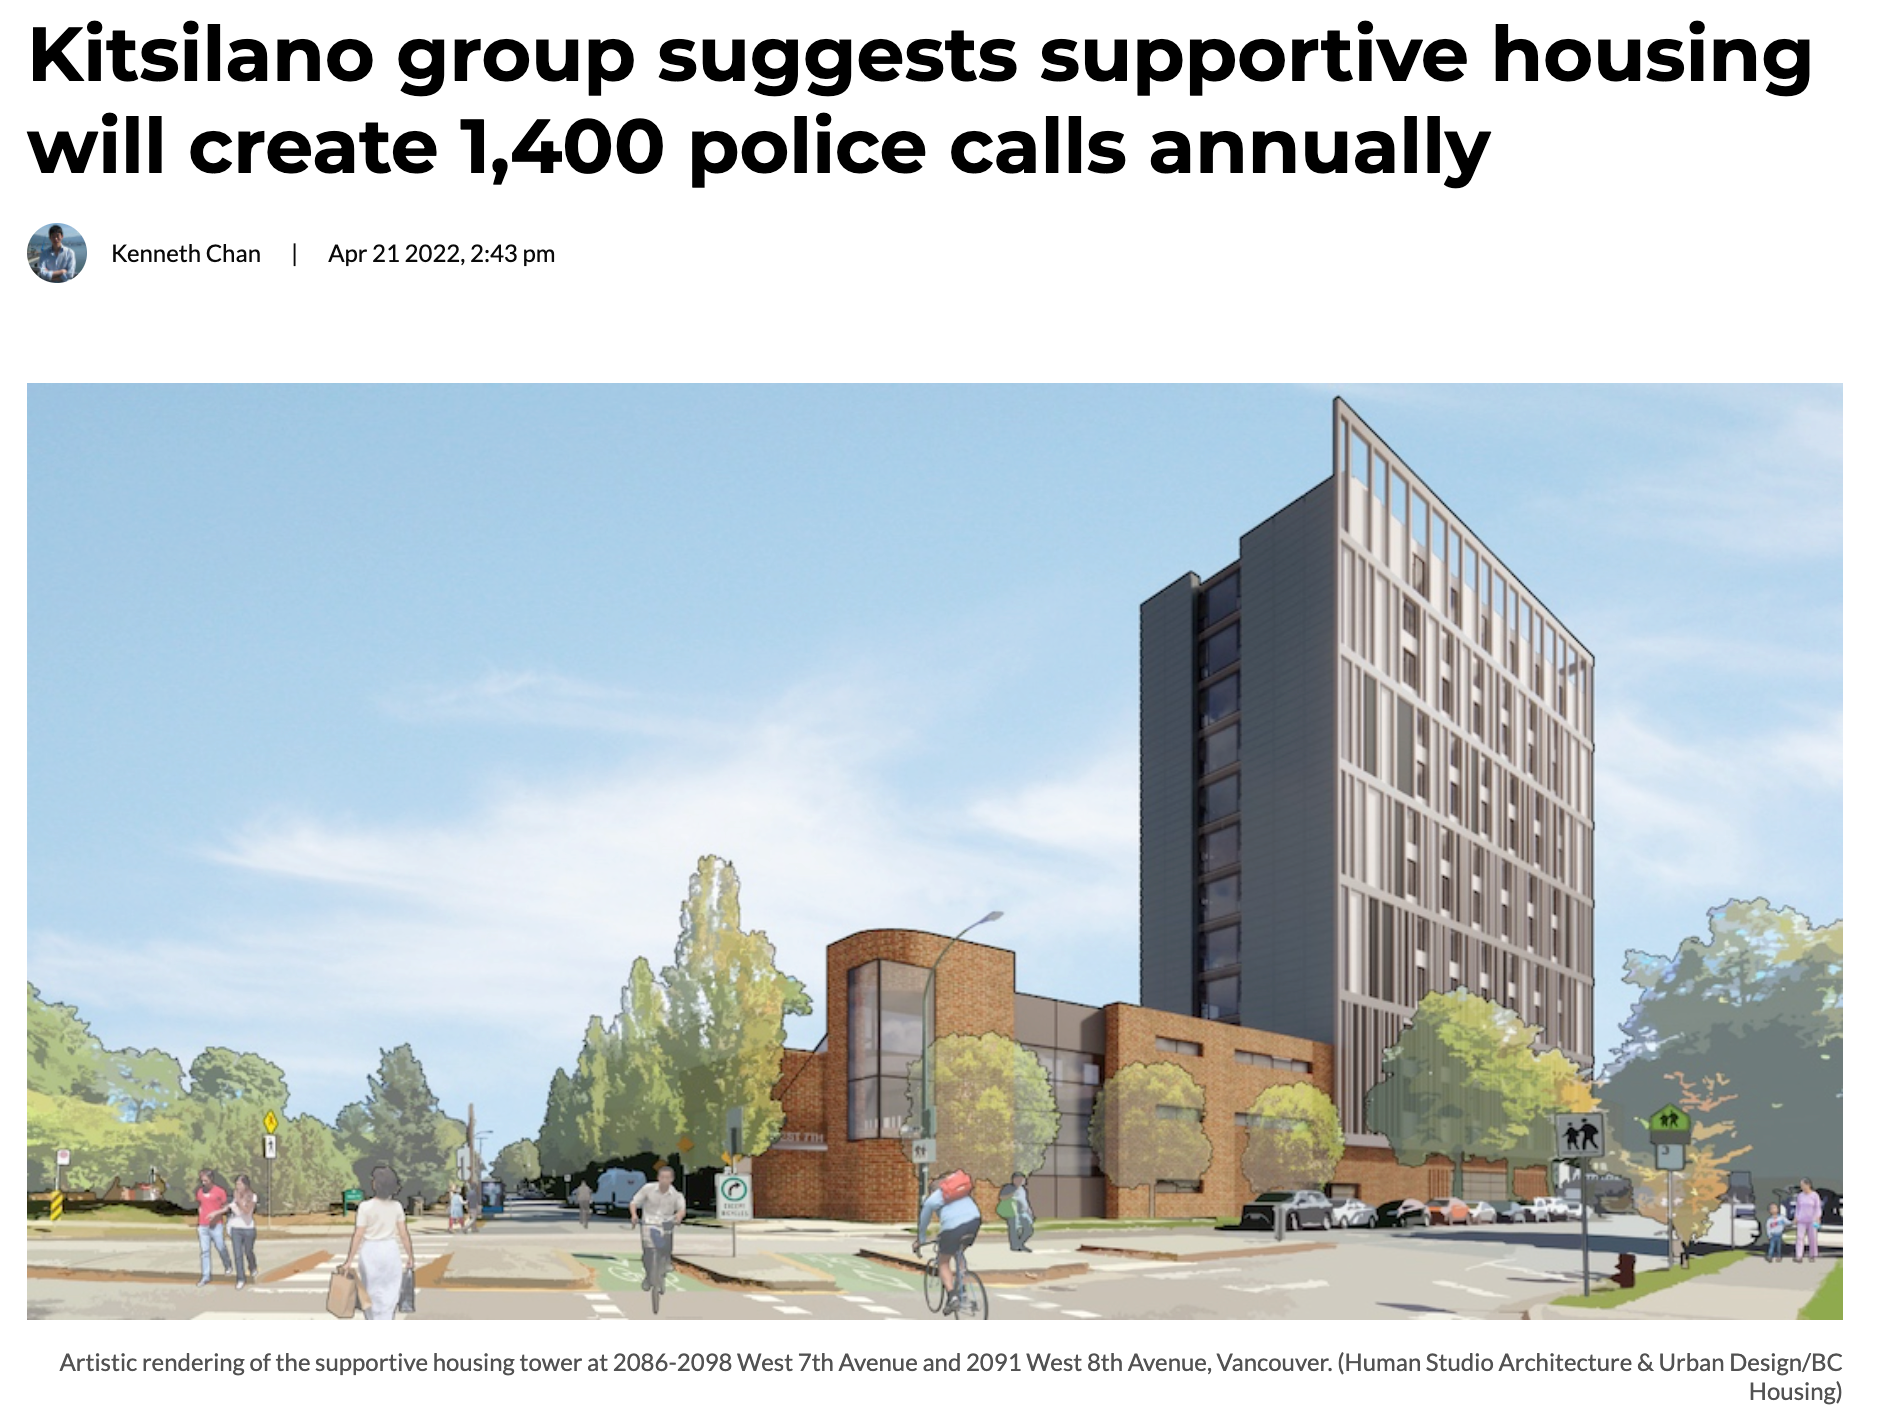 72 supportive units homeless proposed for South Vancouver Urbanized 2022-04-24 at 5.36.01 PM